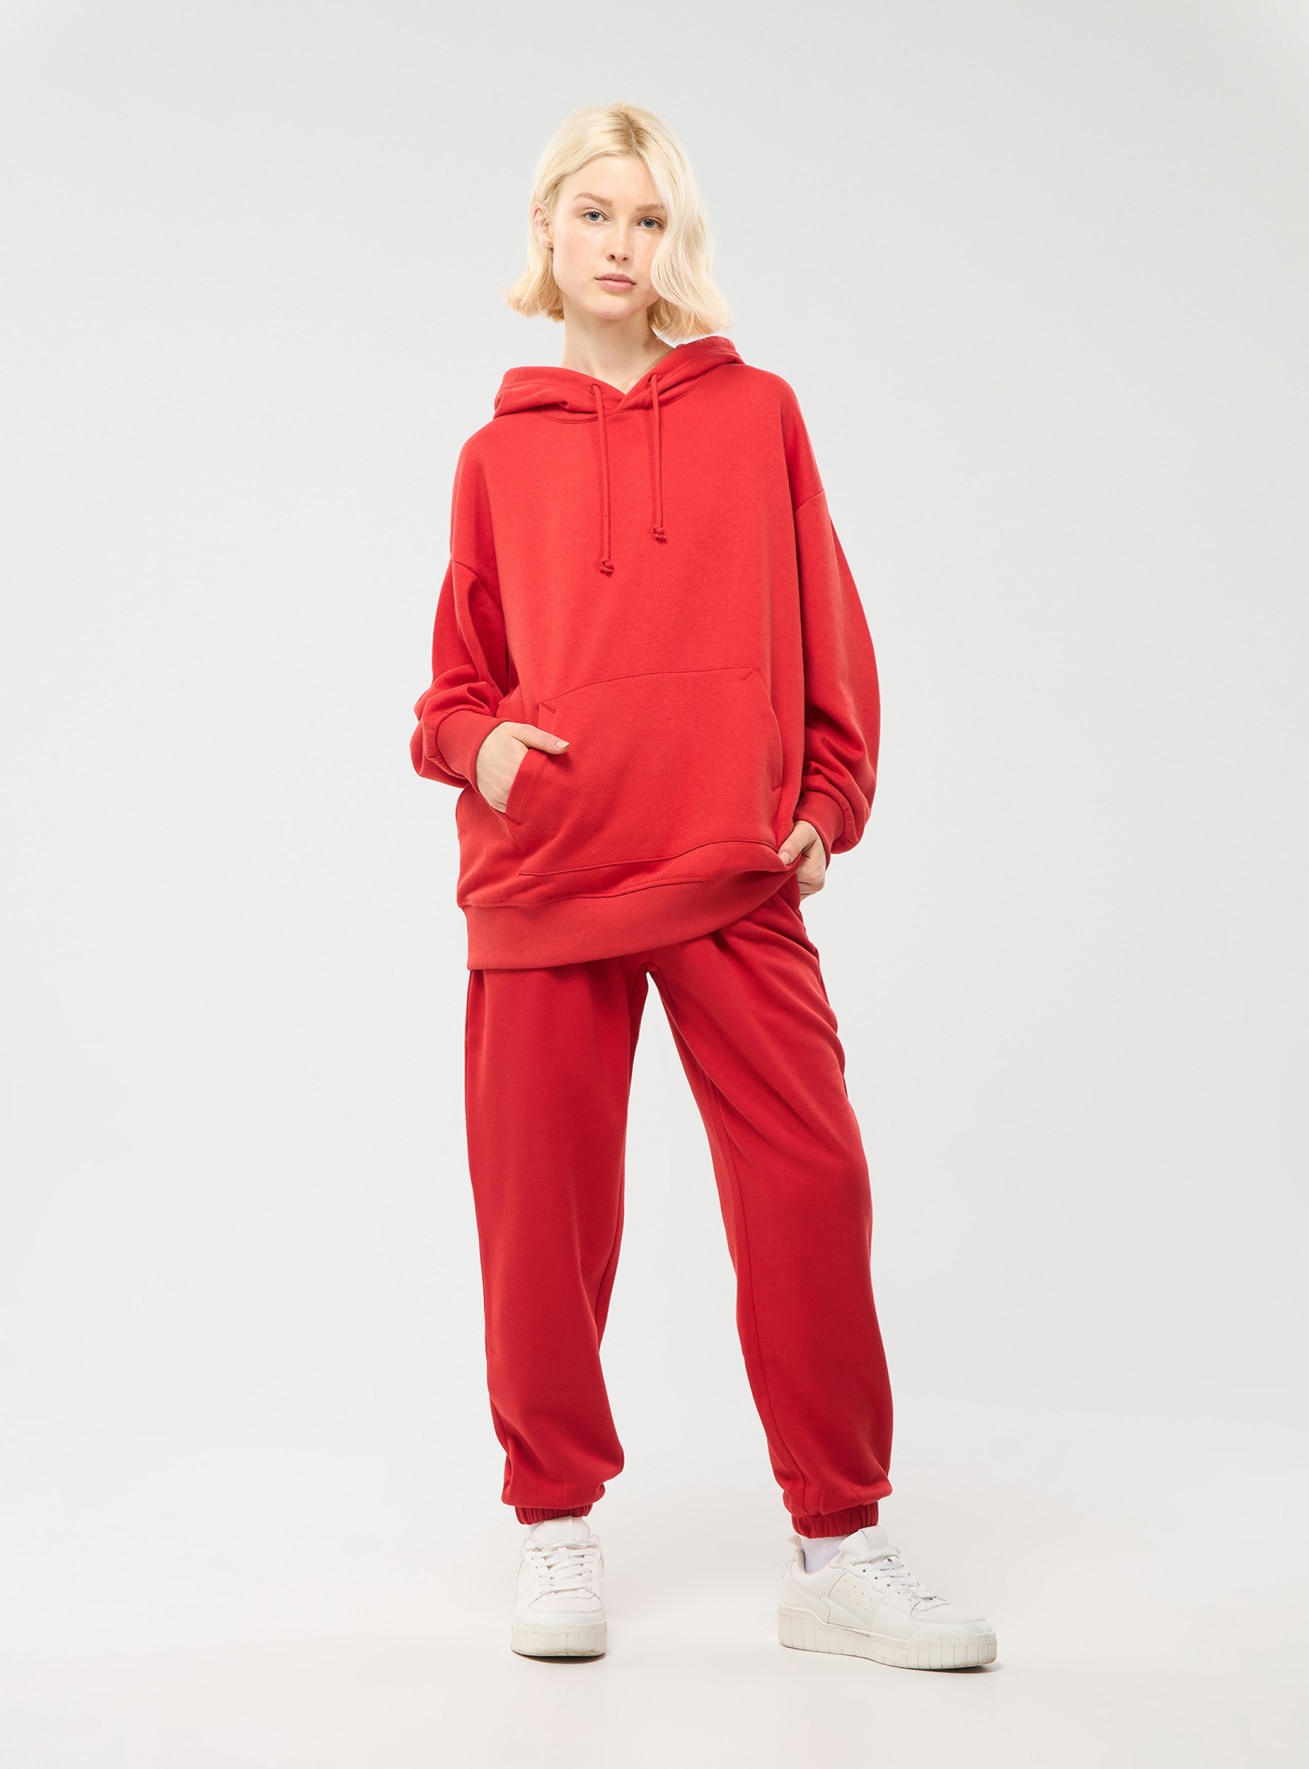 Red High-waisted jogging bottoms in single-colour fabric - Buy Online